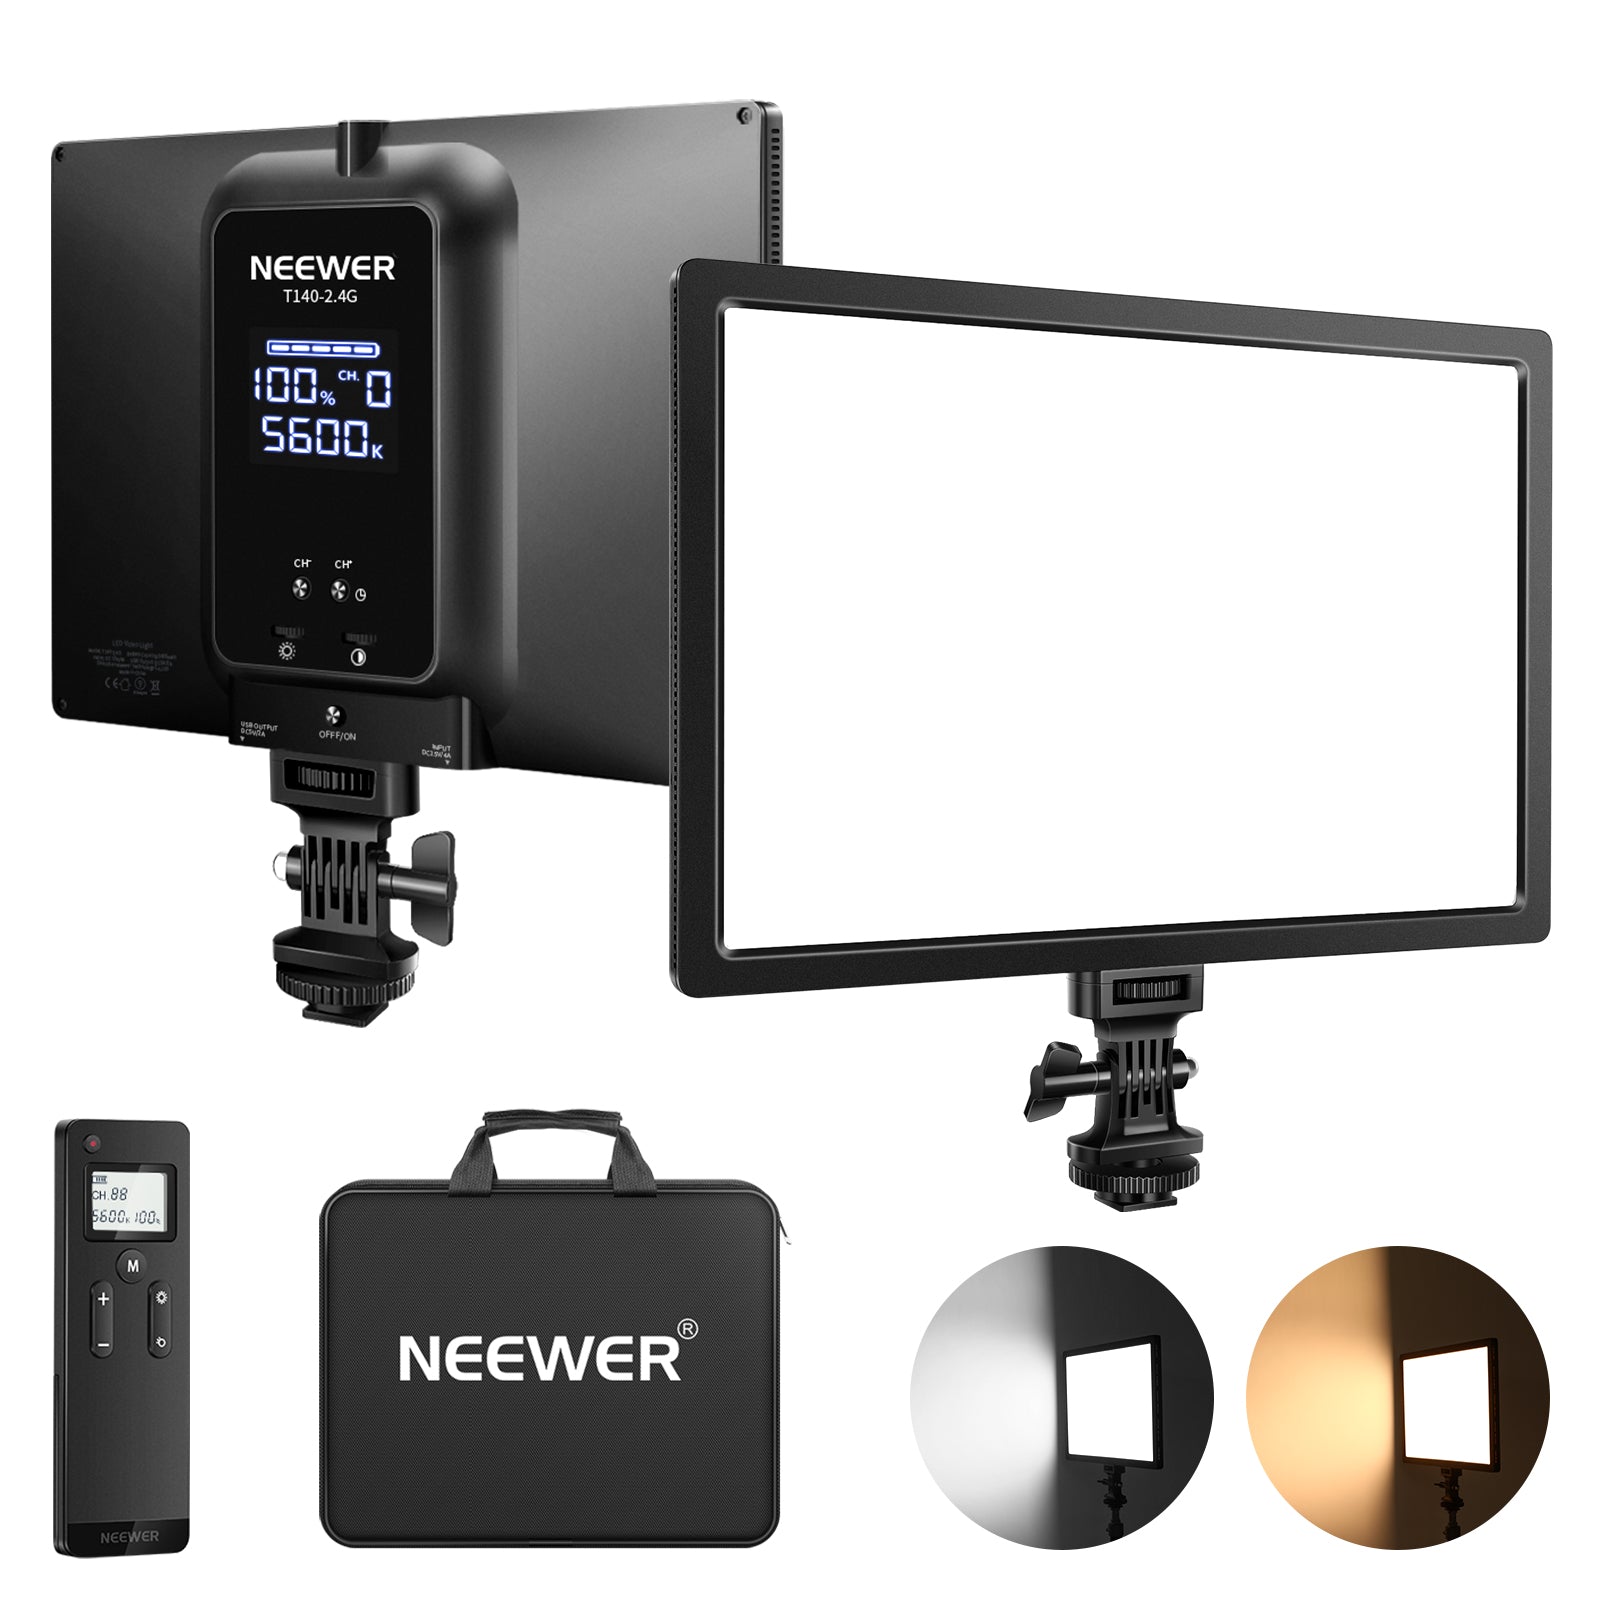 Neewer Bi-color 660 LED Video Light & Stand Kit Unboxing and Setup